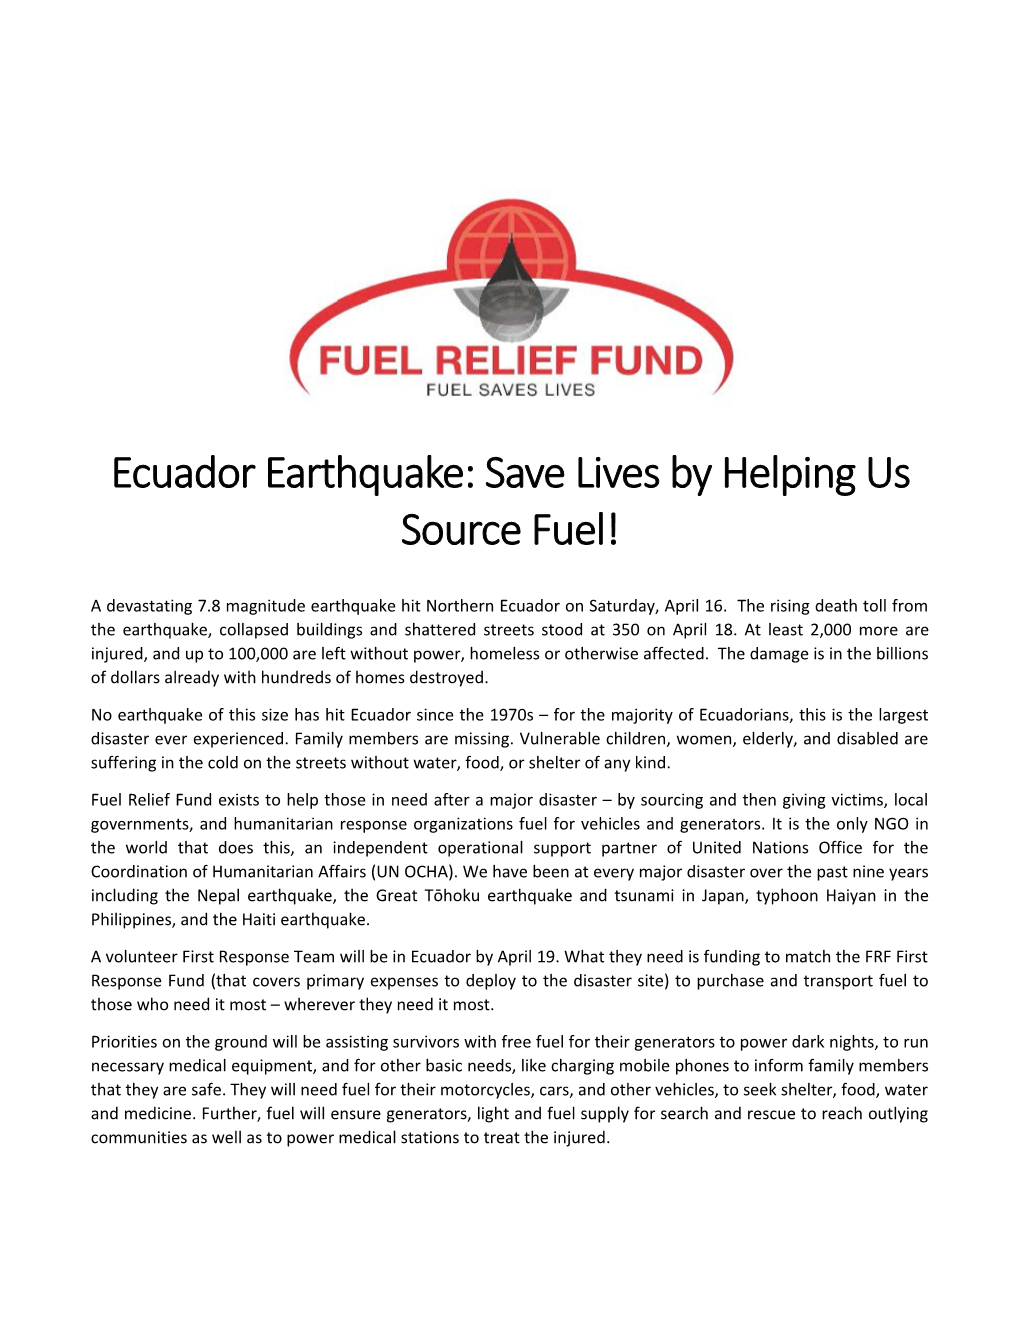 Ecuador Earthquake: Save Lives by Helping Us Source Fuel!